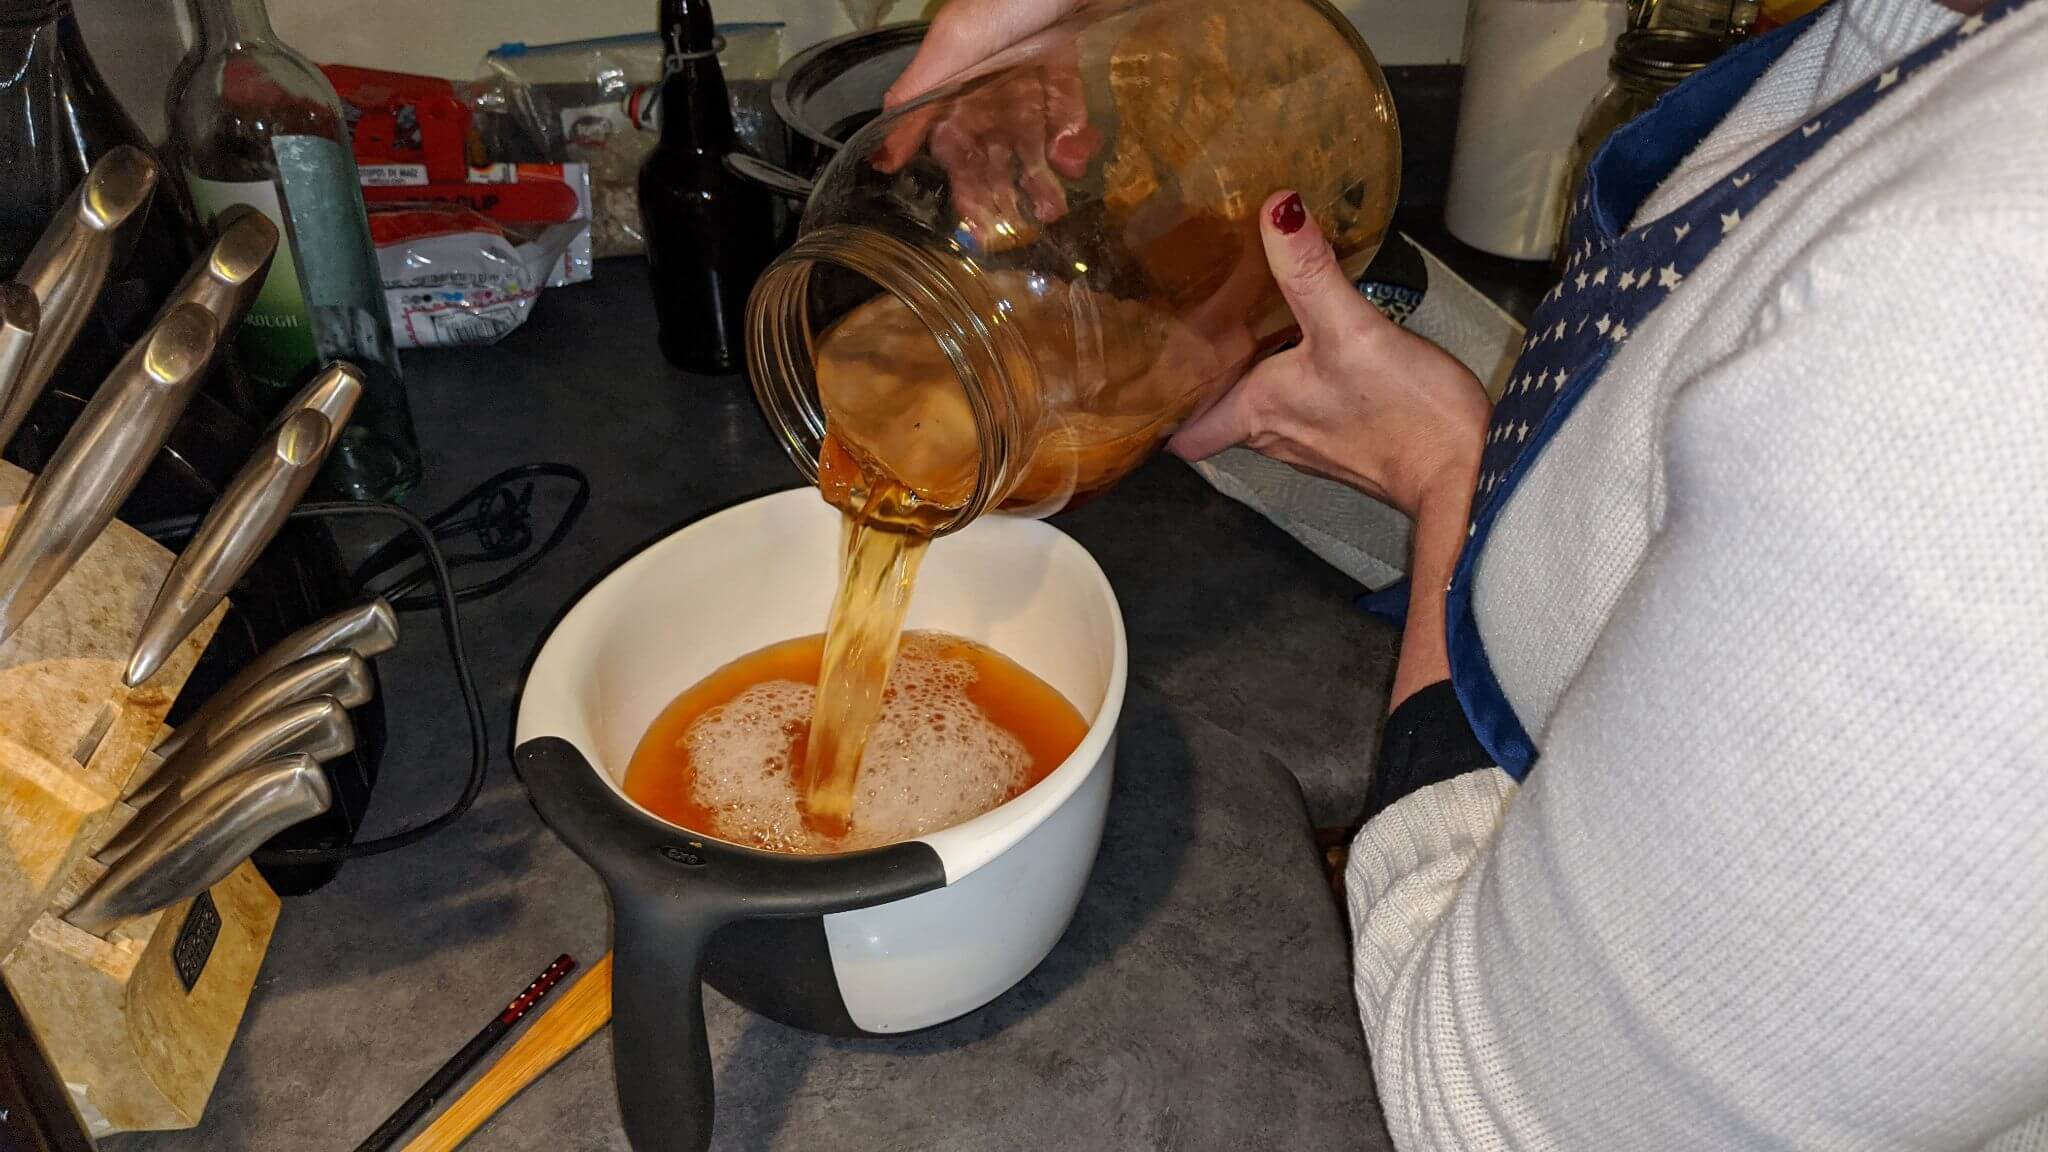 Pouring kombucha into a handled pouring bowl